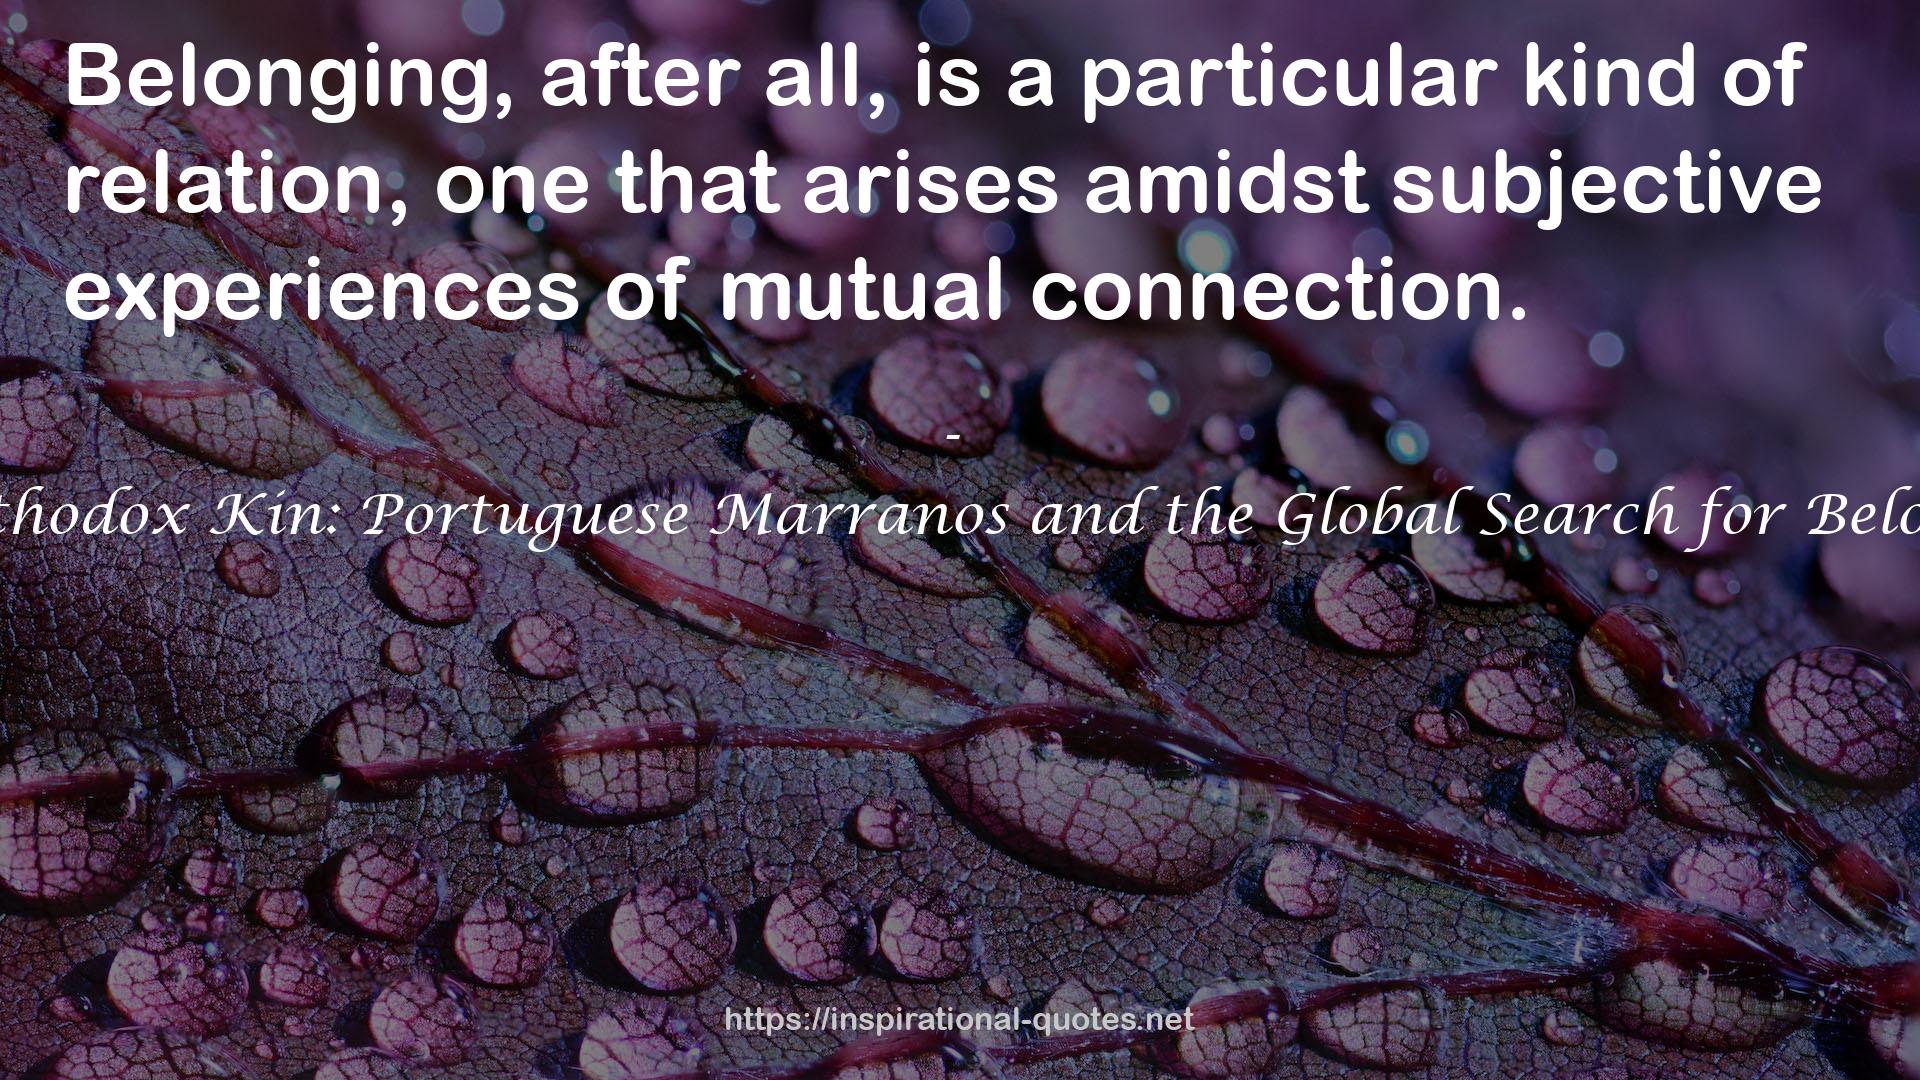 Unorthodox Kin: Portuguese Marranos and the Global Search for Belonging QUOTES